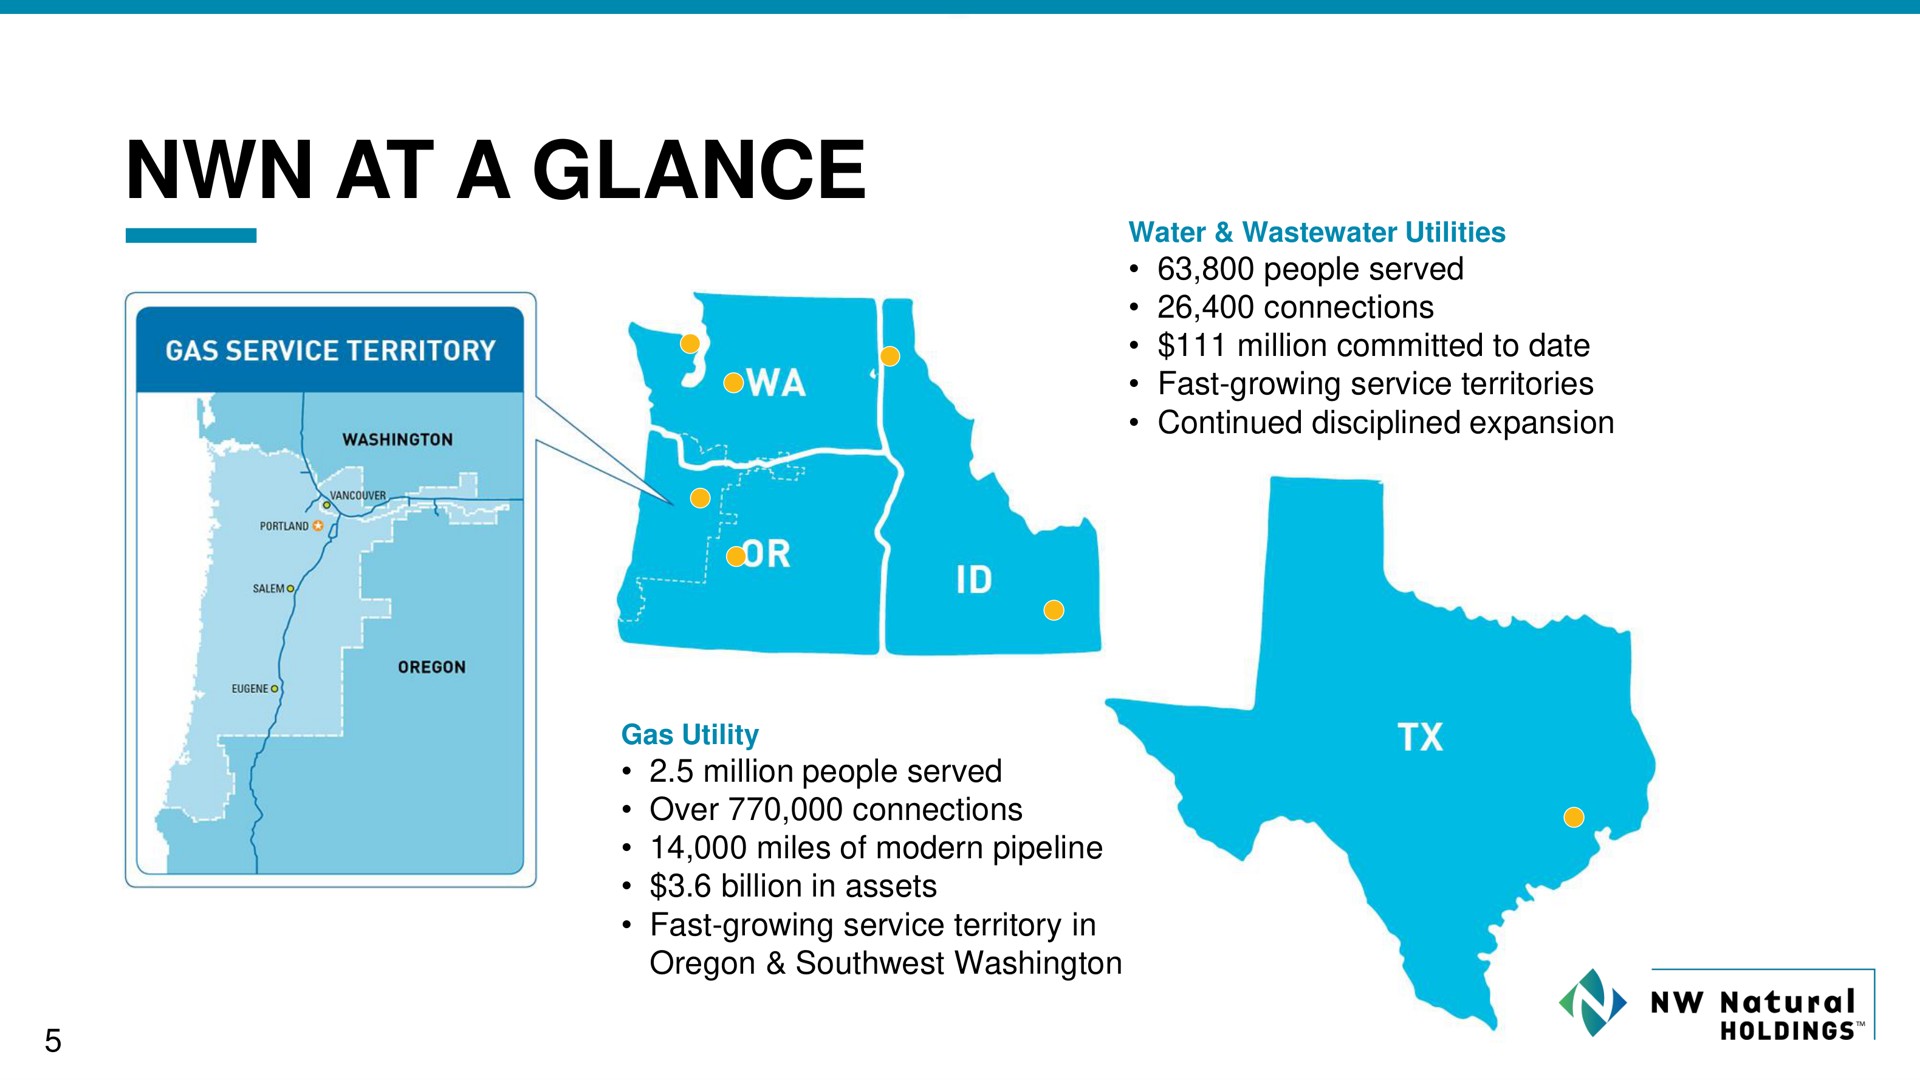 at a glance | NW Natural Holdings